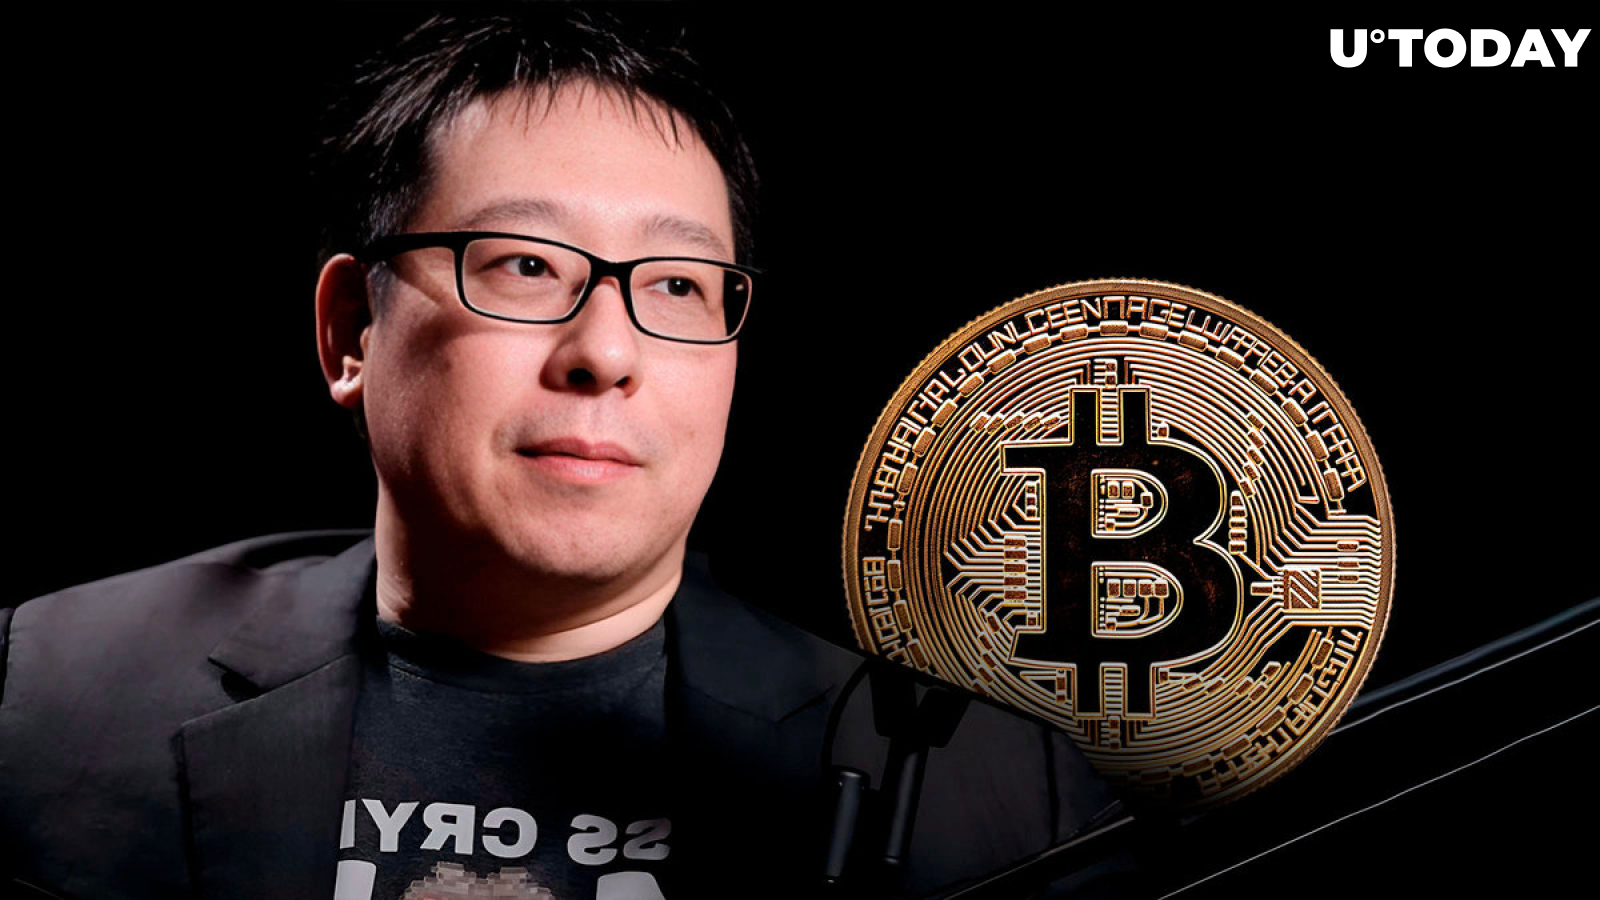 Major Bitcoin Warning Made by Samson Mow to Community: Details